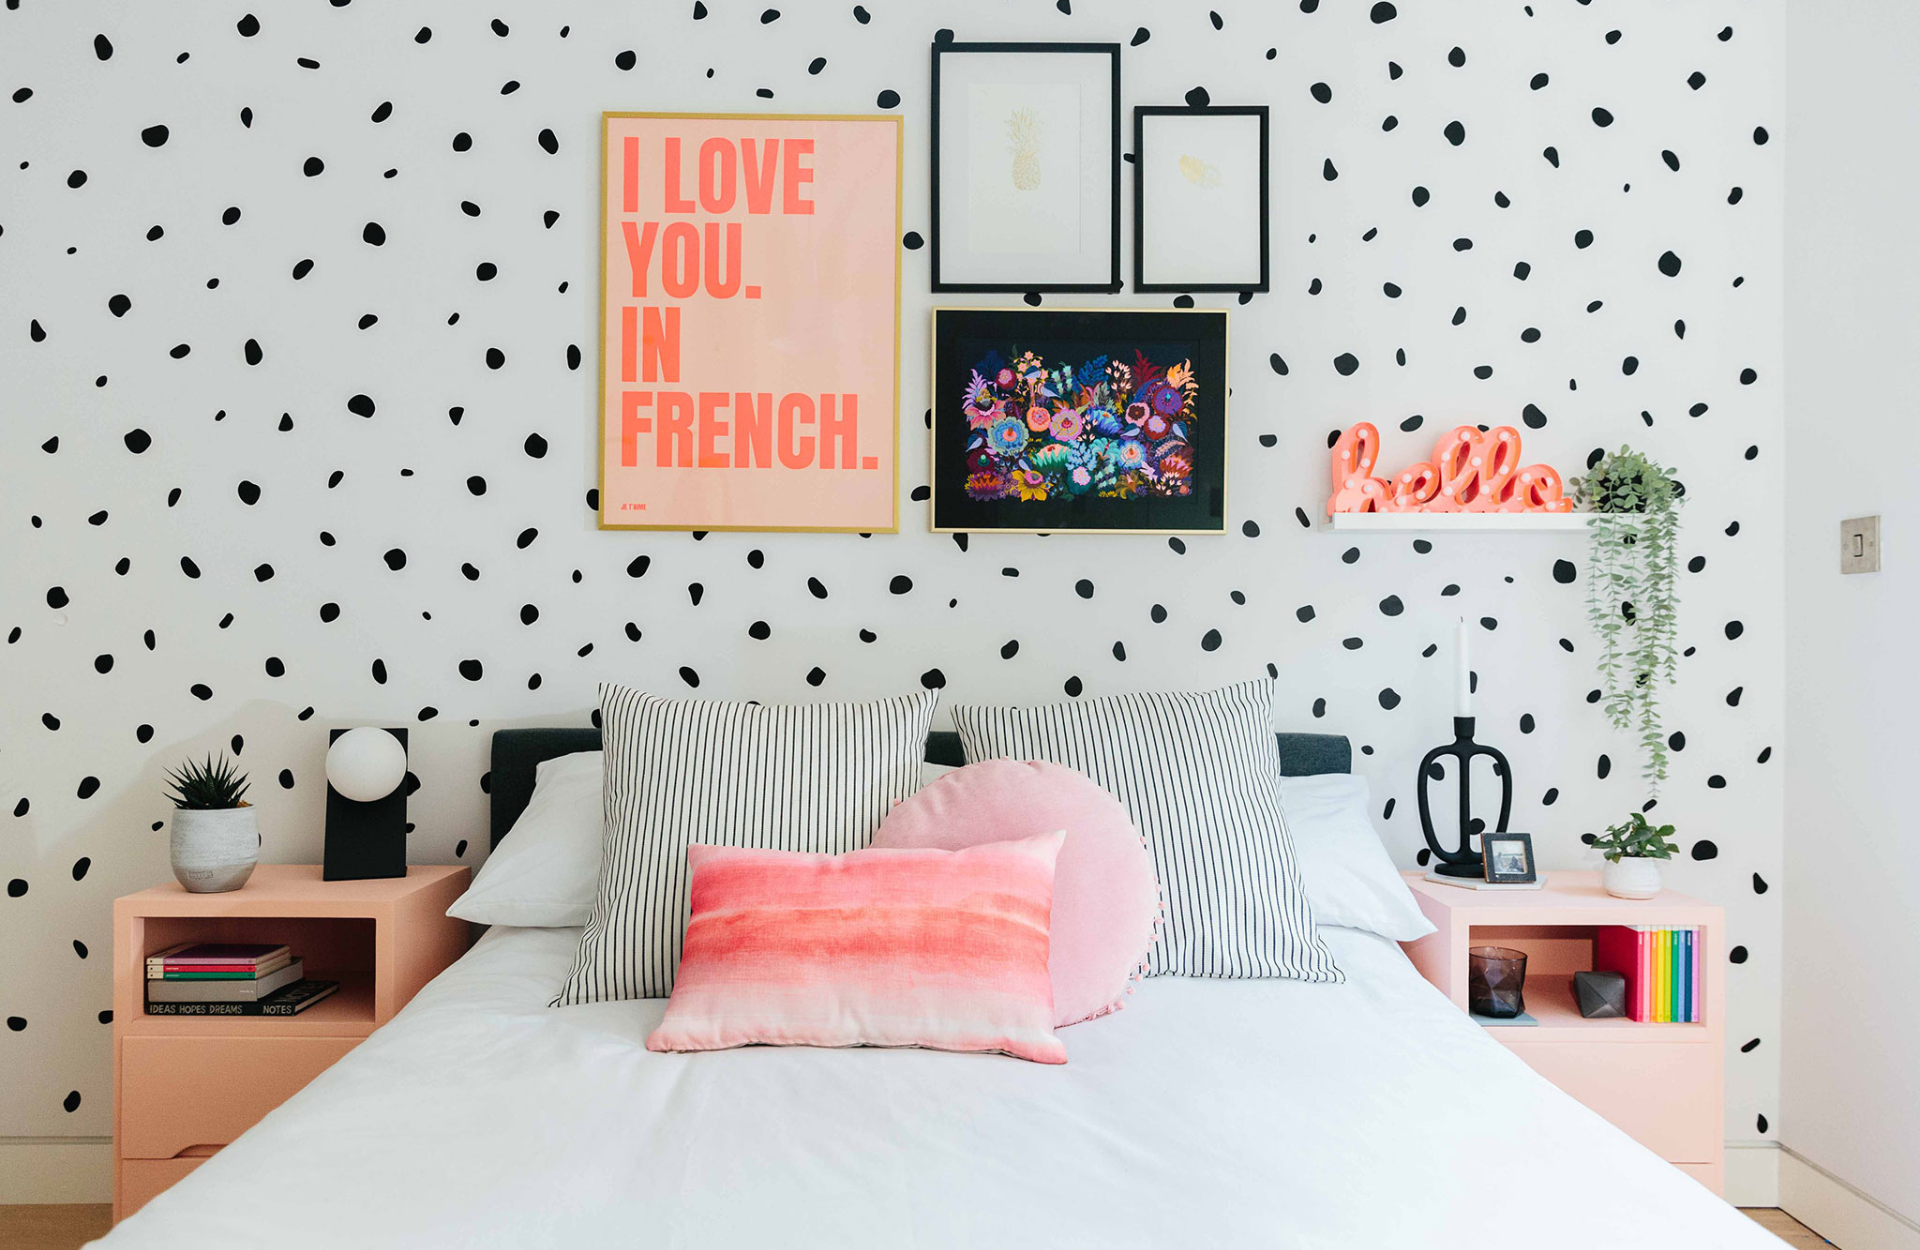 Kid's room with white wall and black dots